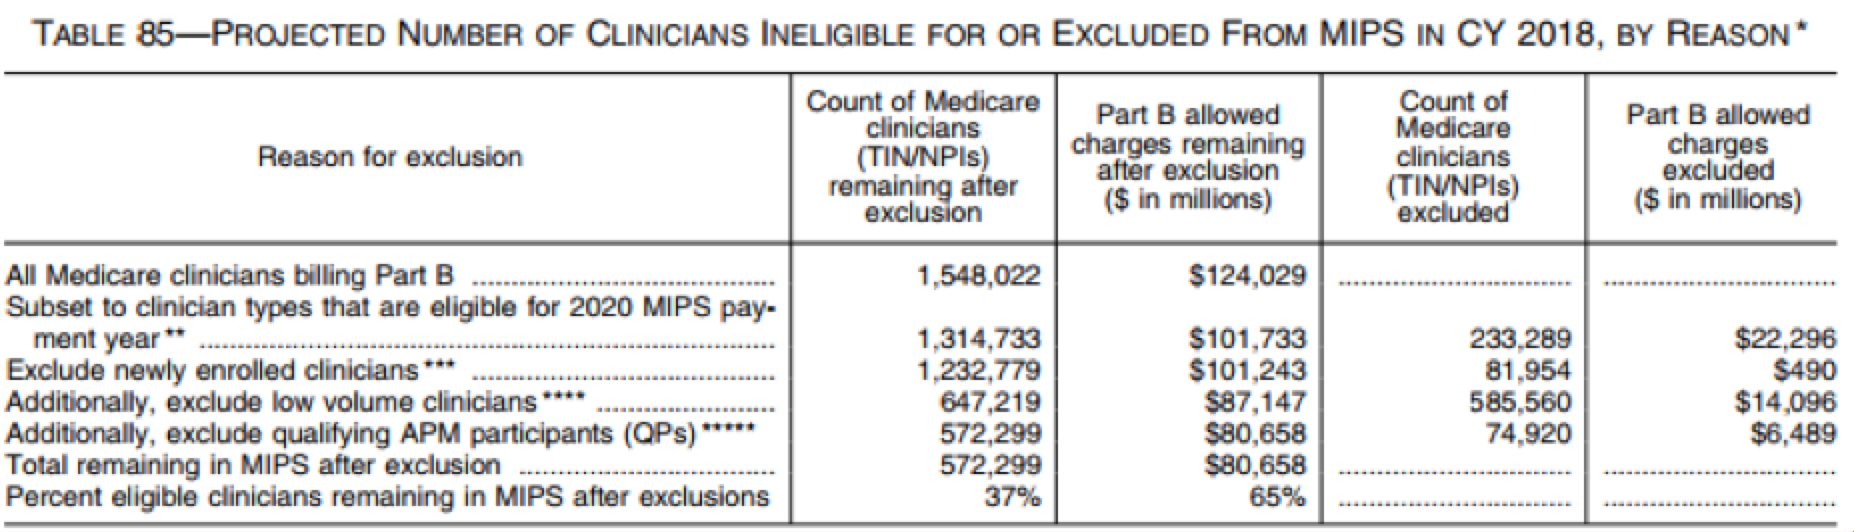 Projected number of physicians ineligible for or excluded from MIPS in 2018